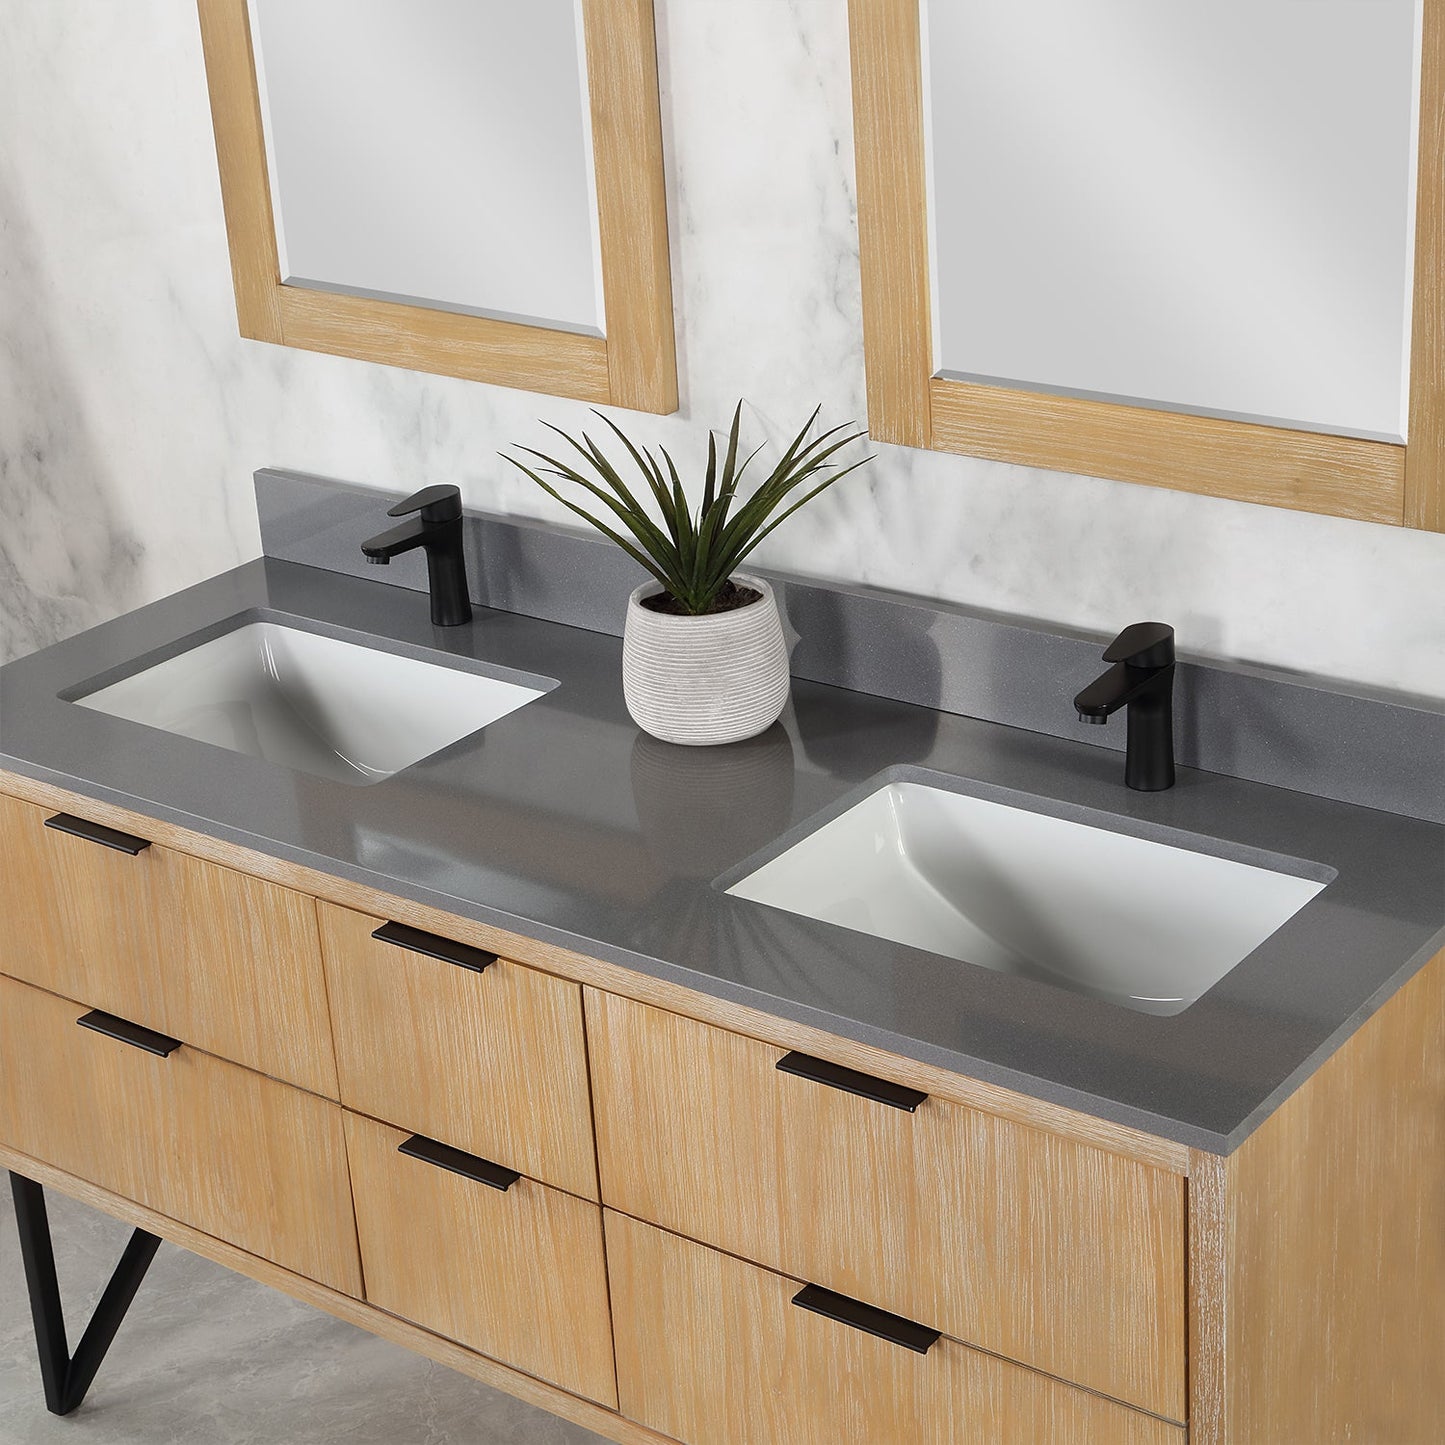 Helios 60" Double Bathroom Vanity in Weathered Pine with Carrara White Composite Stone Countertop with Mirror